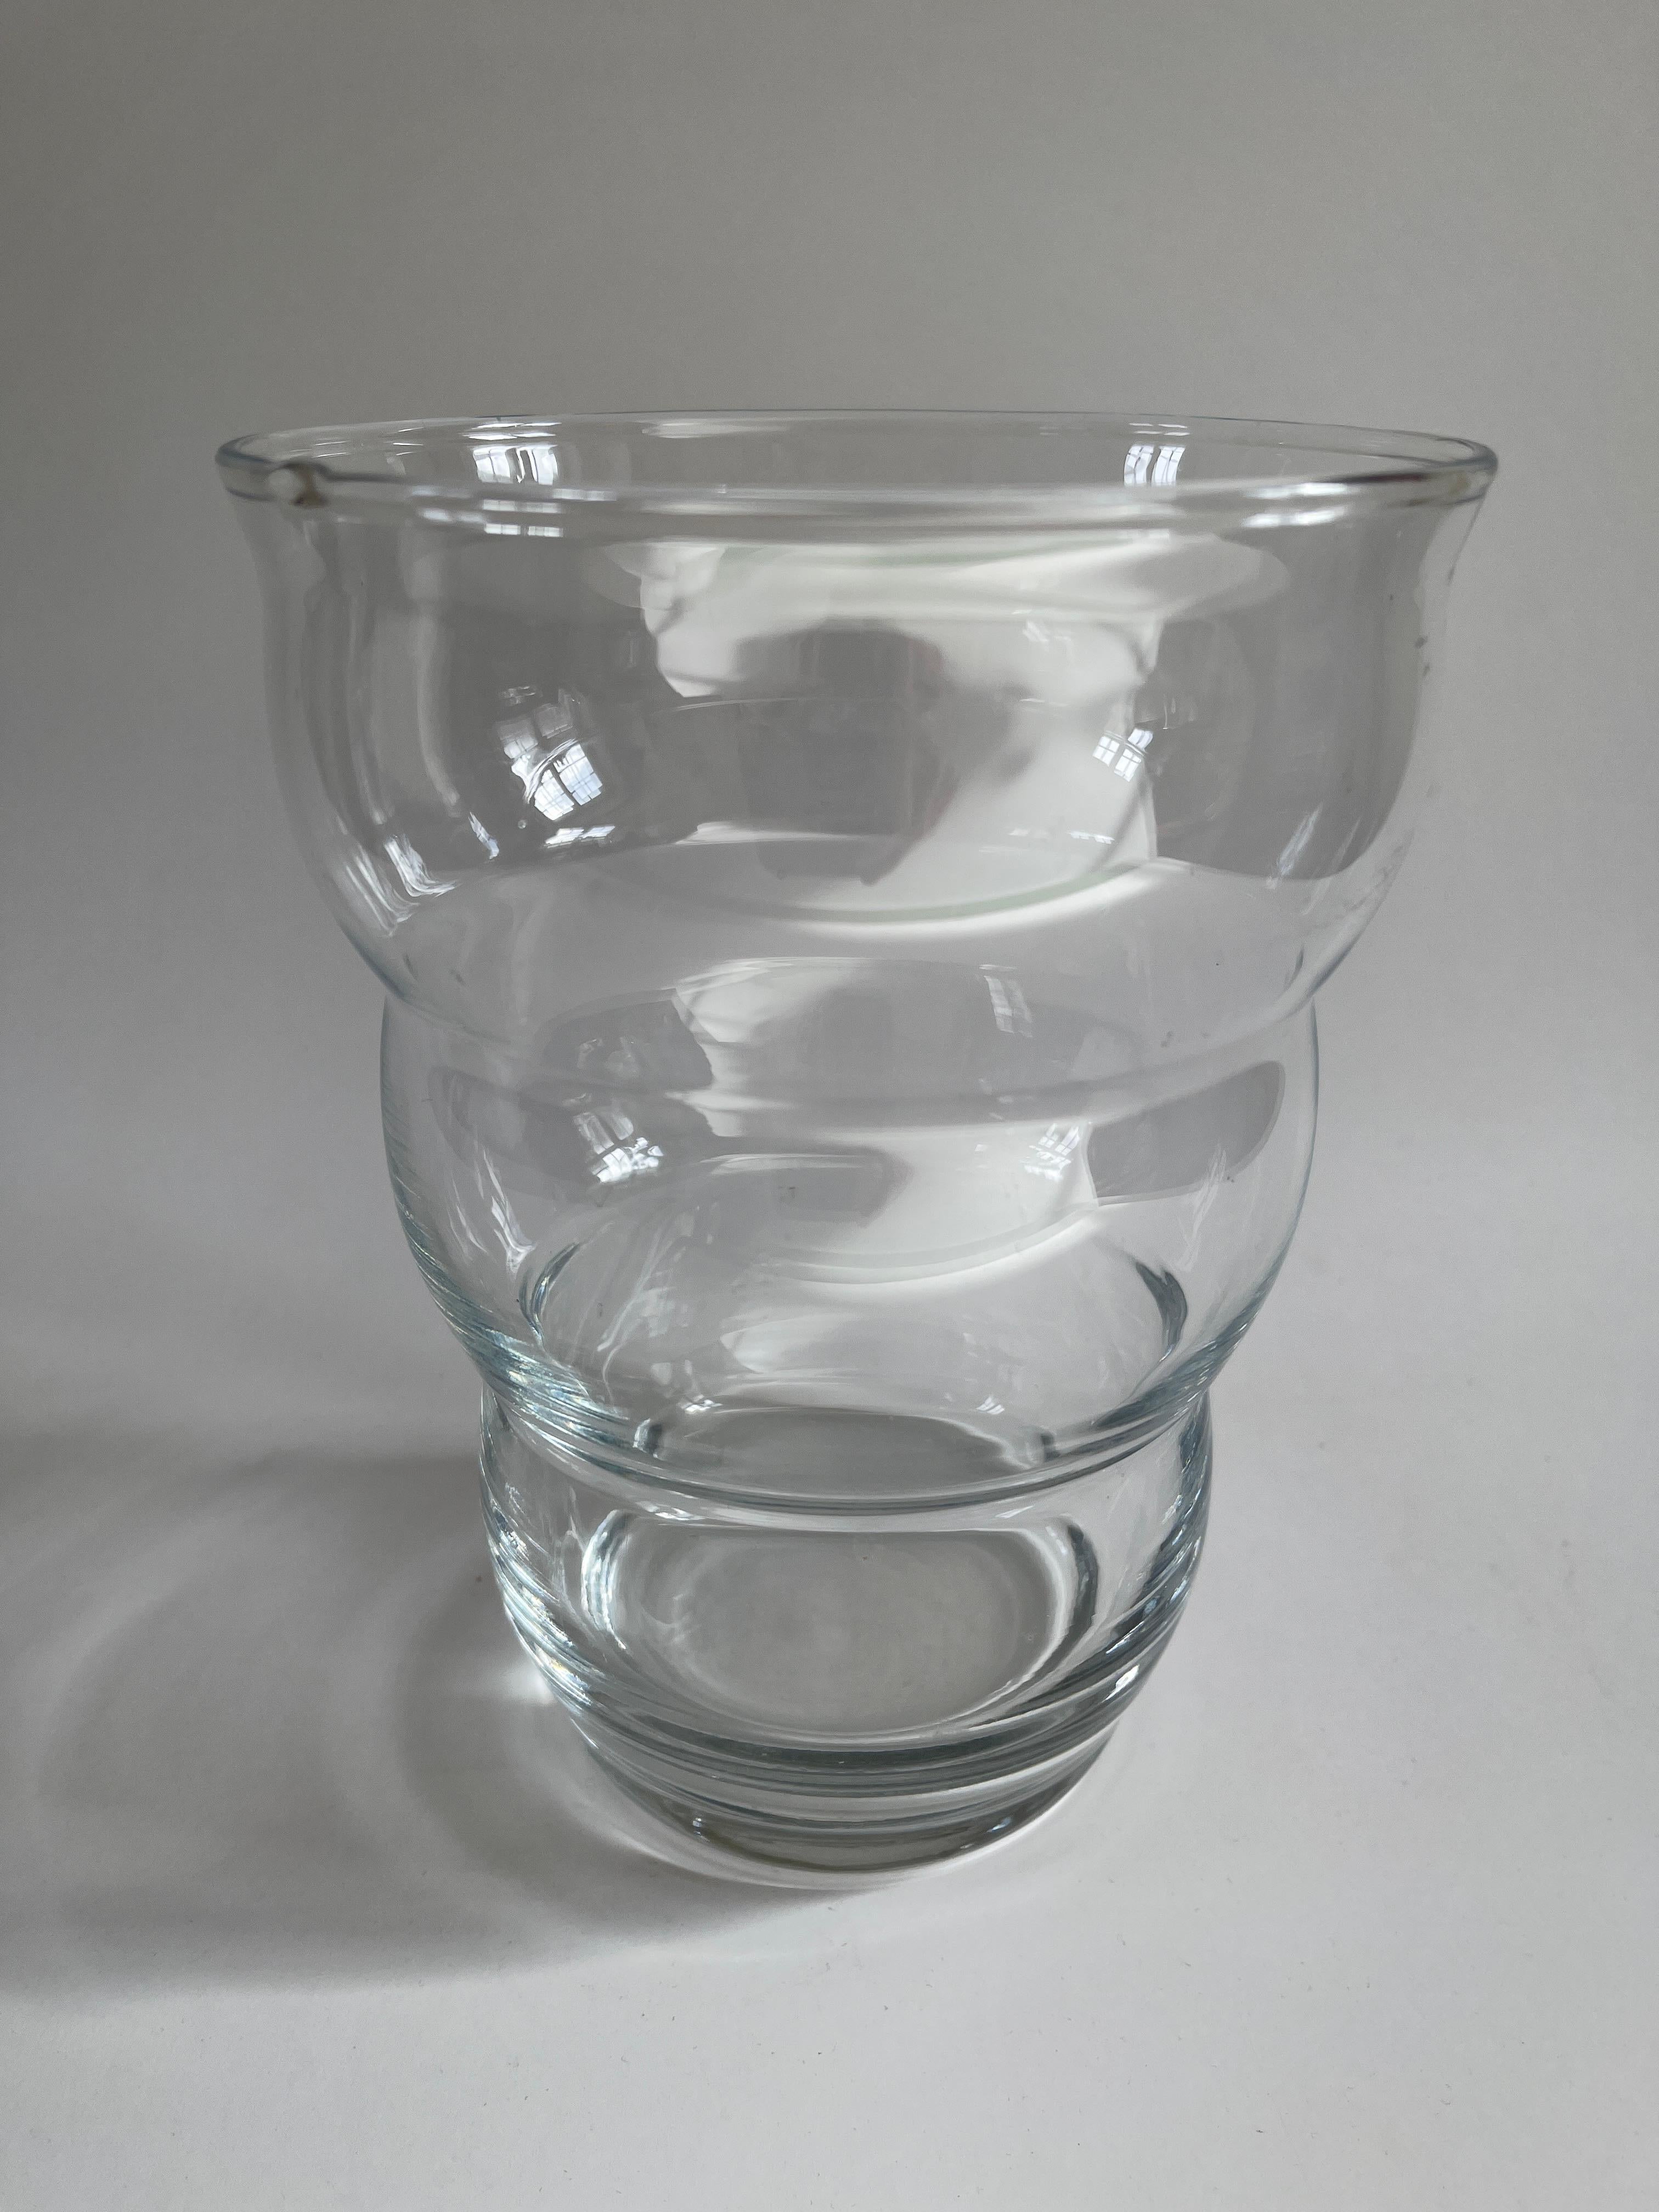 Lustrous clear glass beehive form vase with sensuous light capturing curves.
Denmark, c. 1960's.